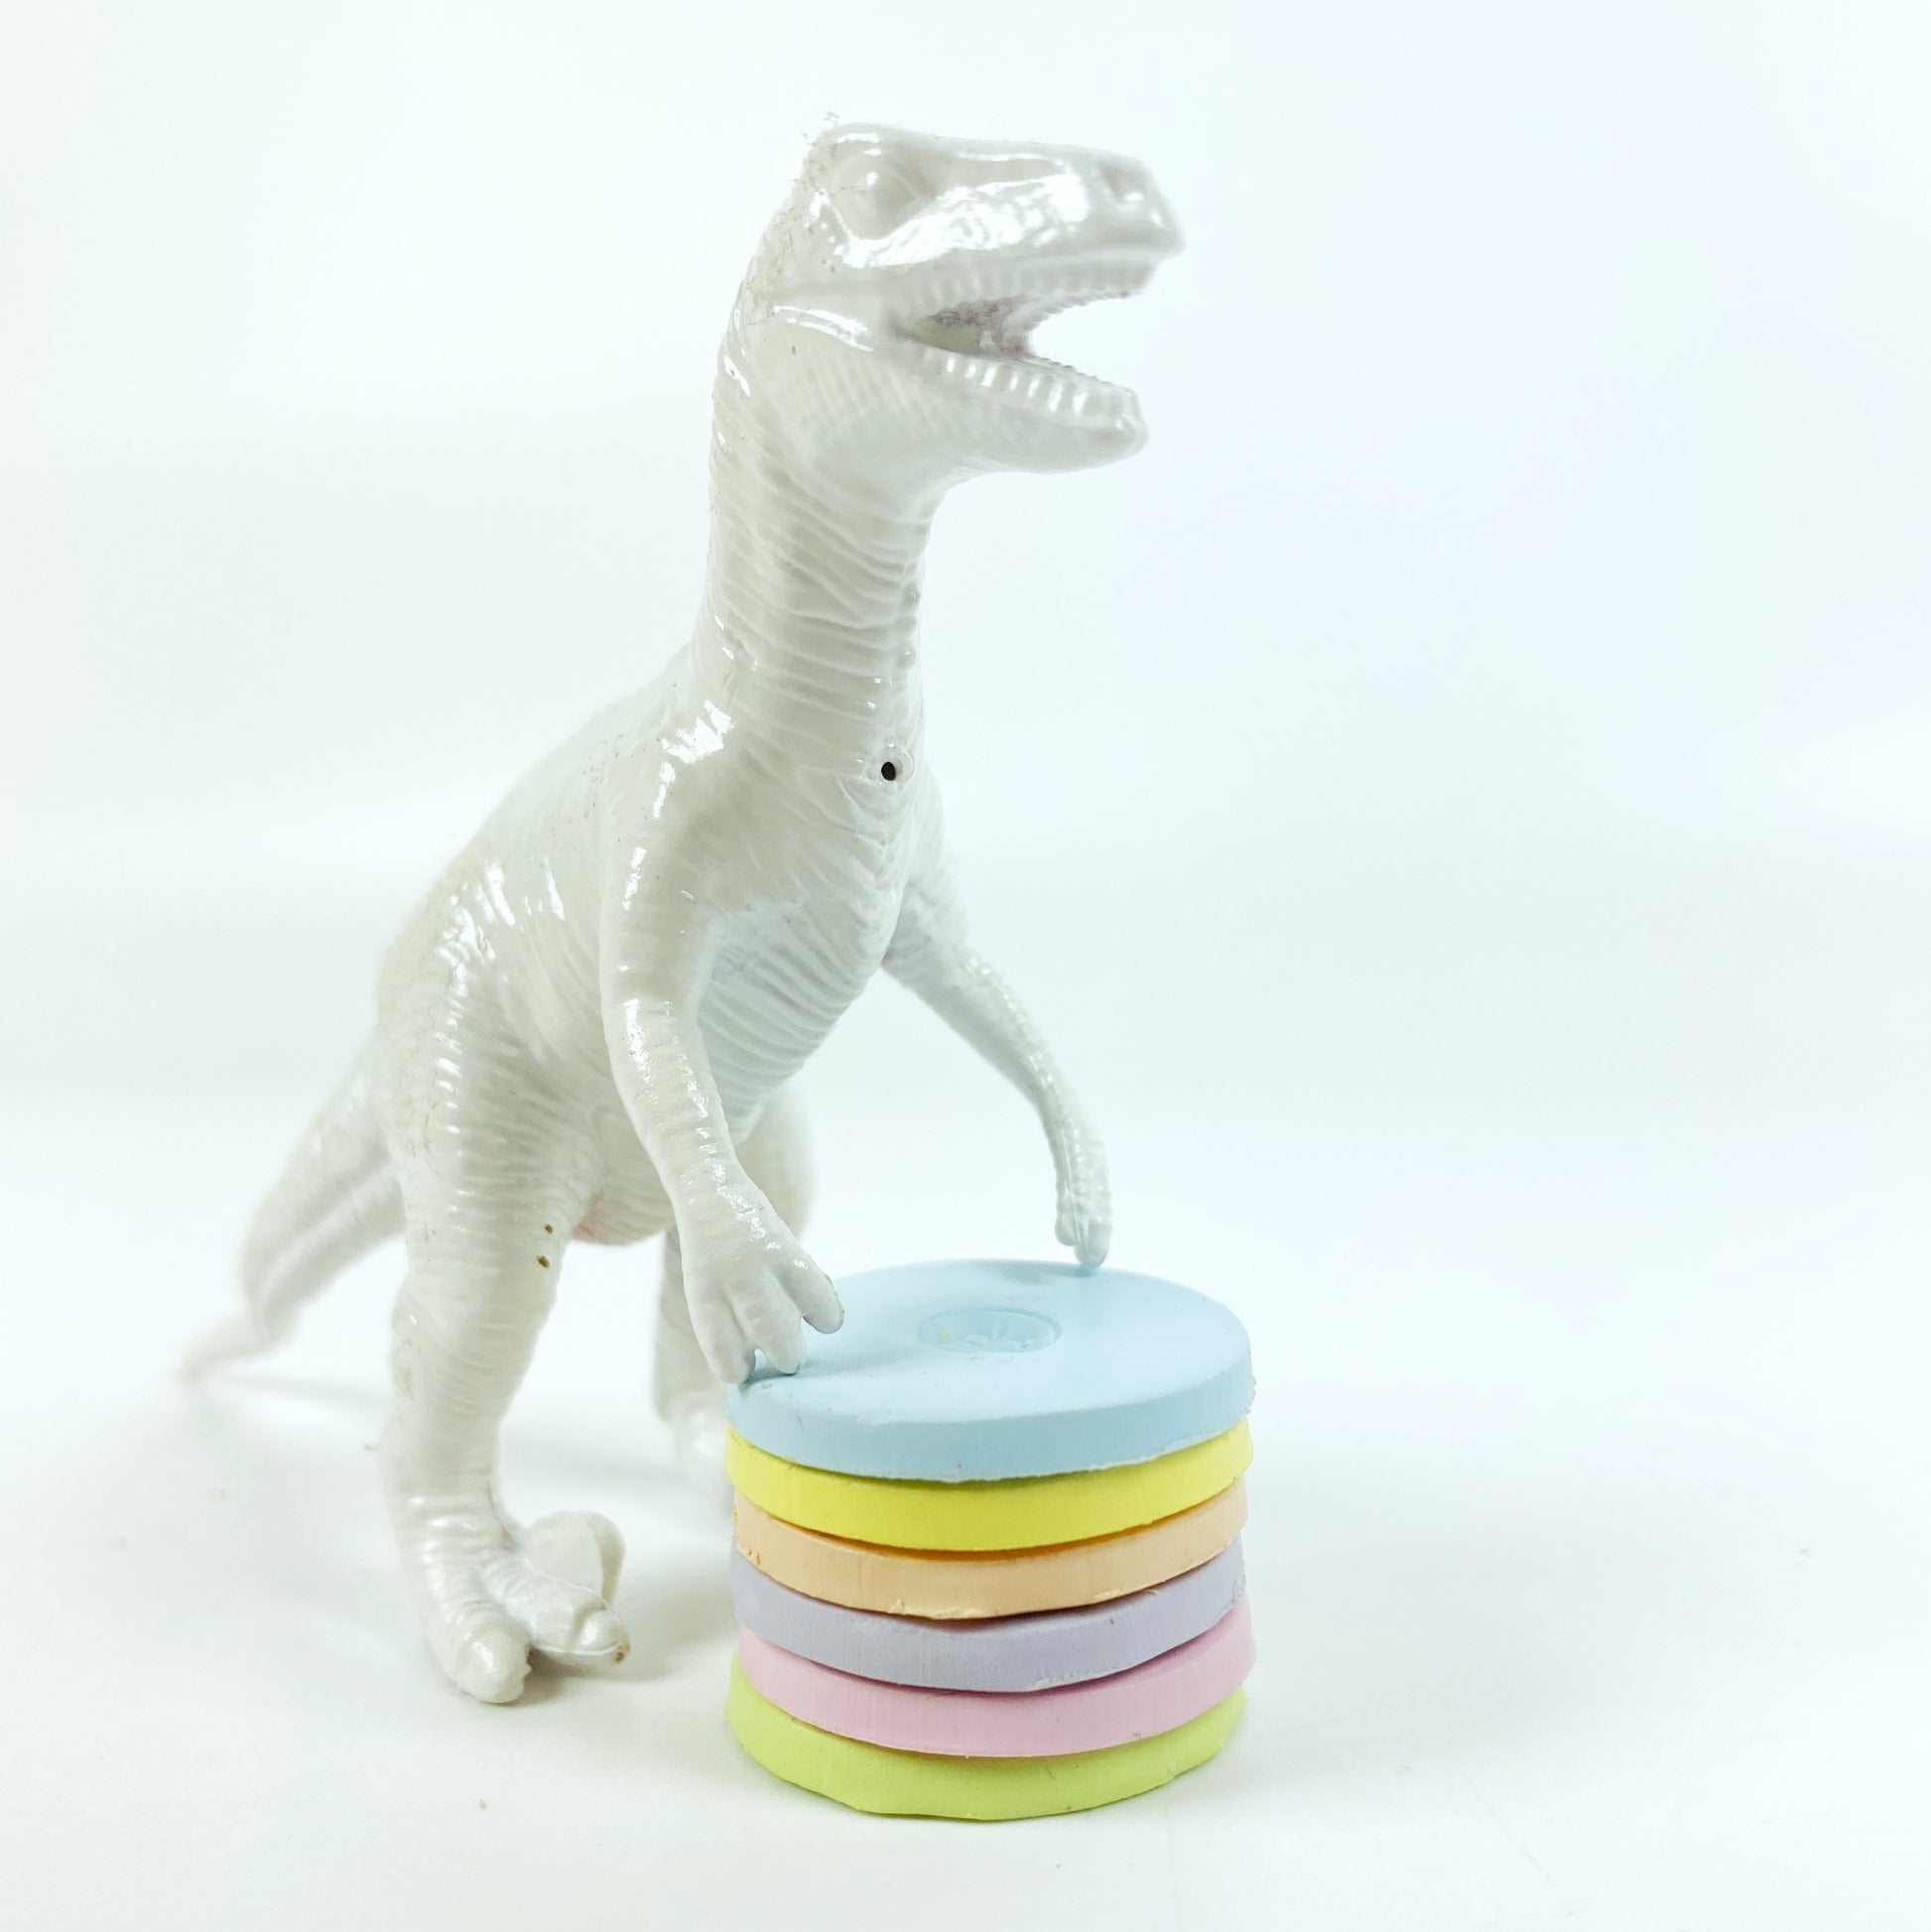 A stack of 6 polymer clay color sample discs with a white dinosaur presiding.